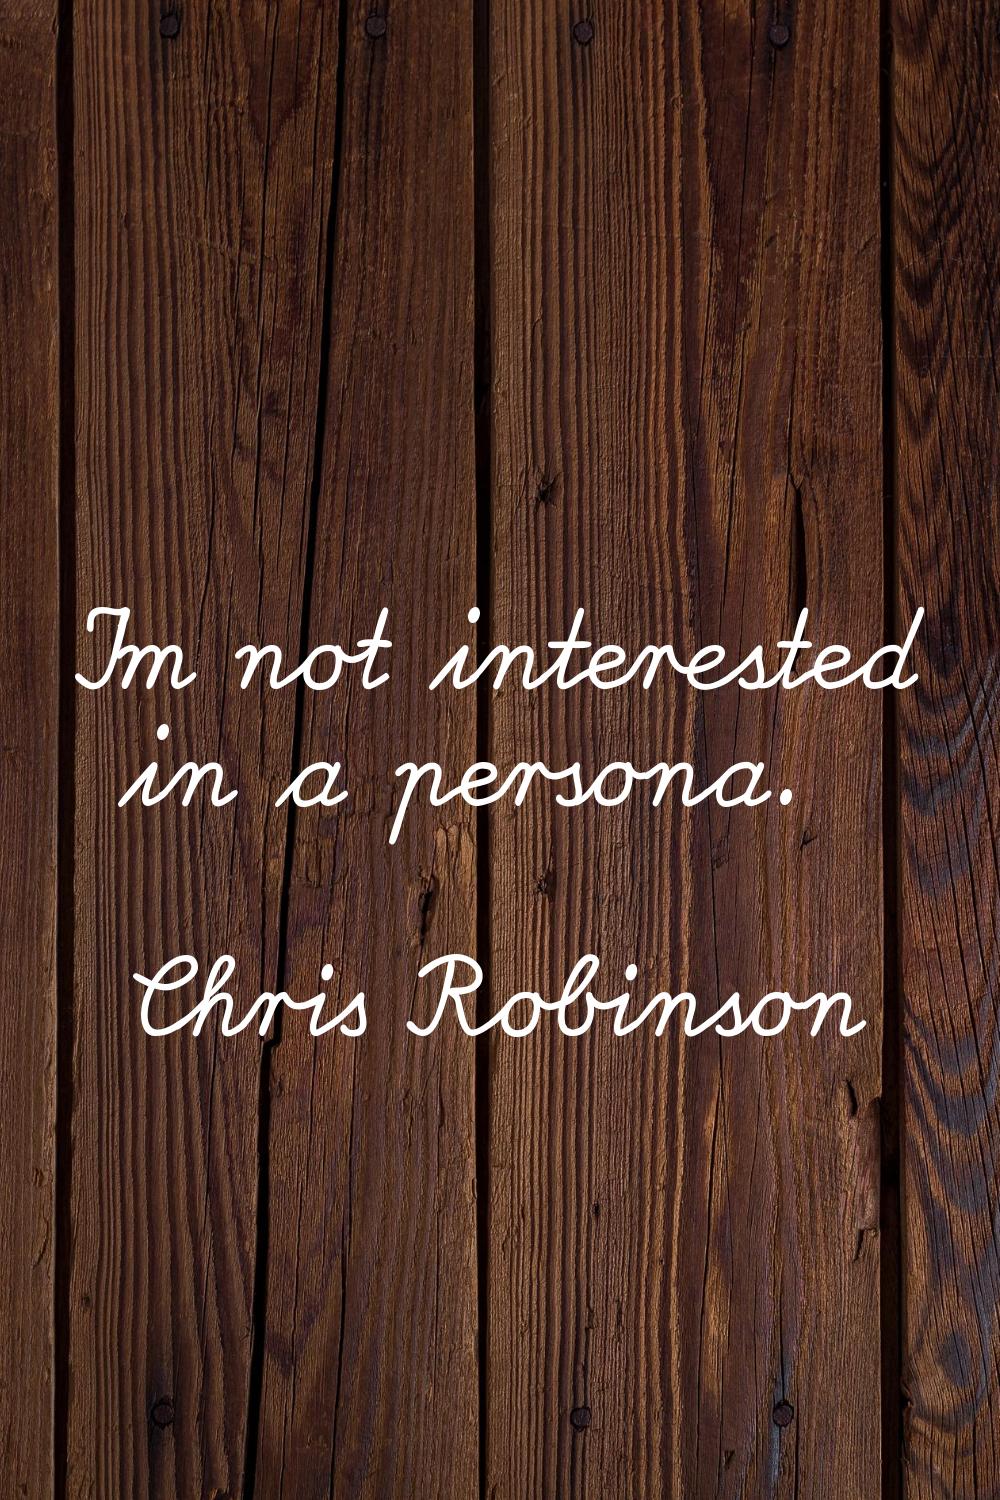 I'm not interested in a persona.